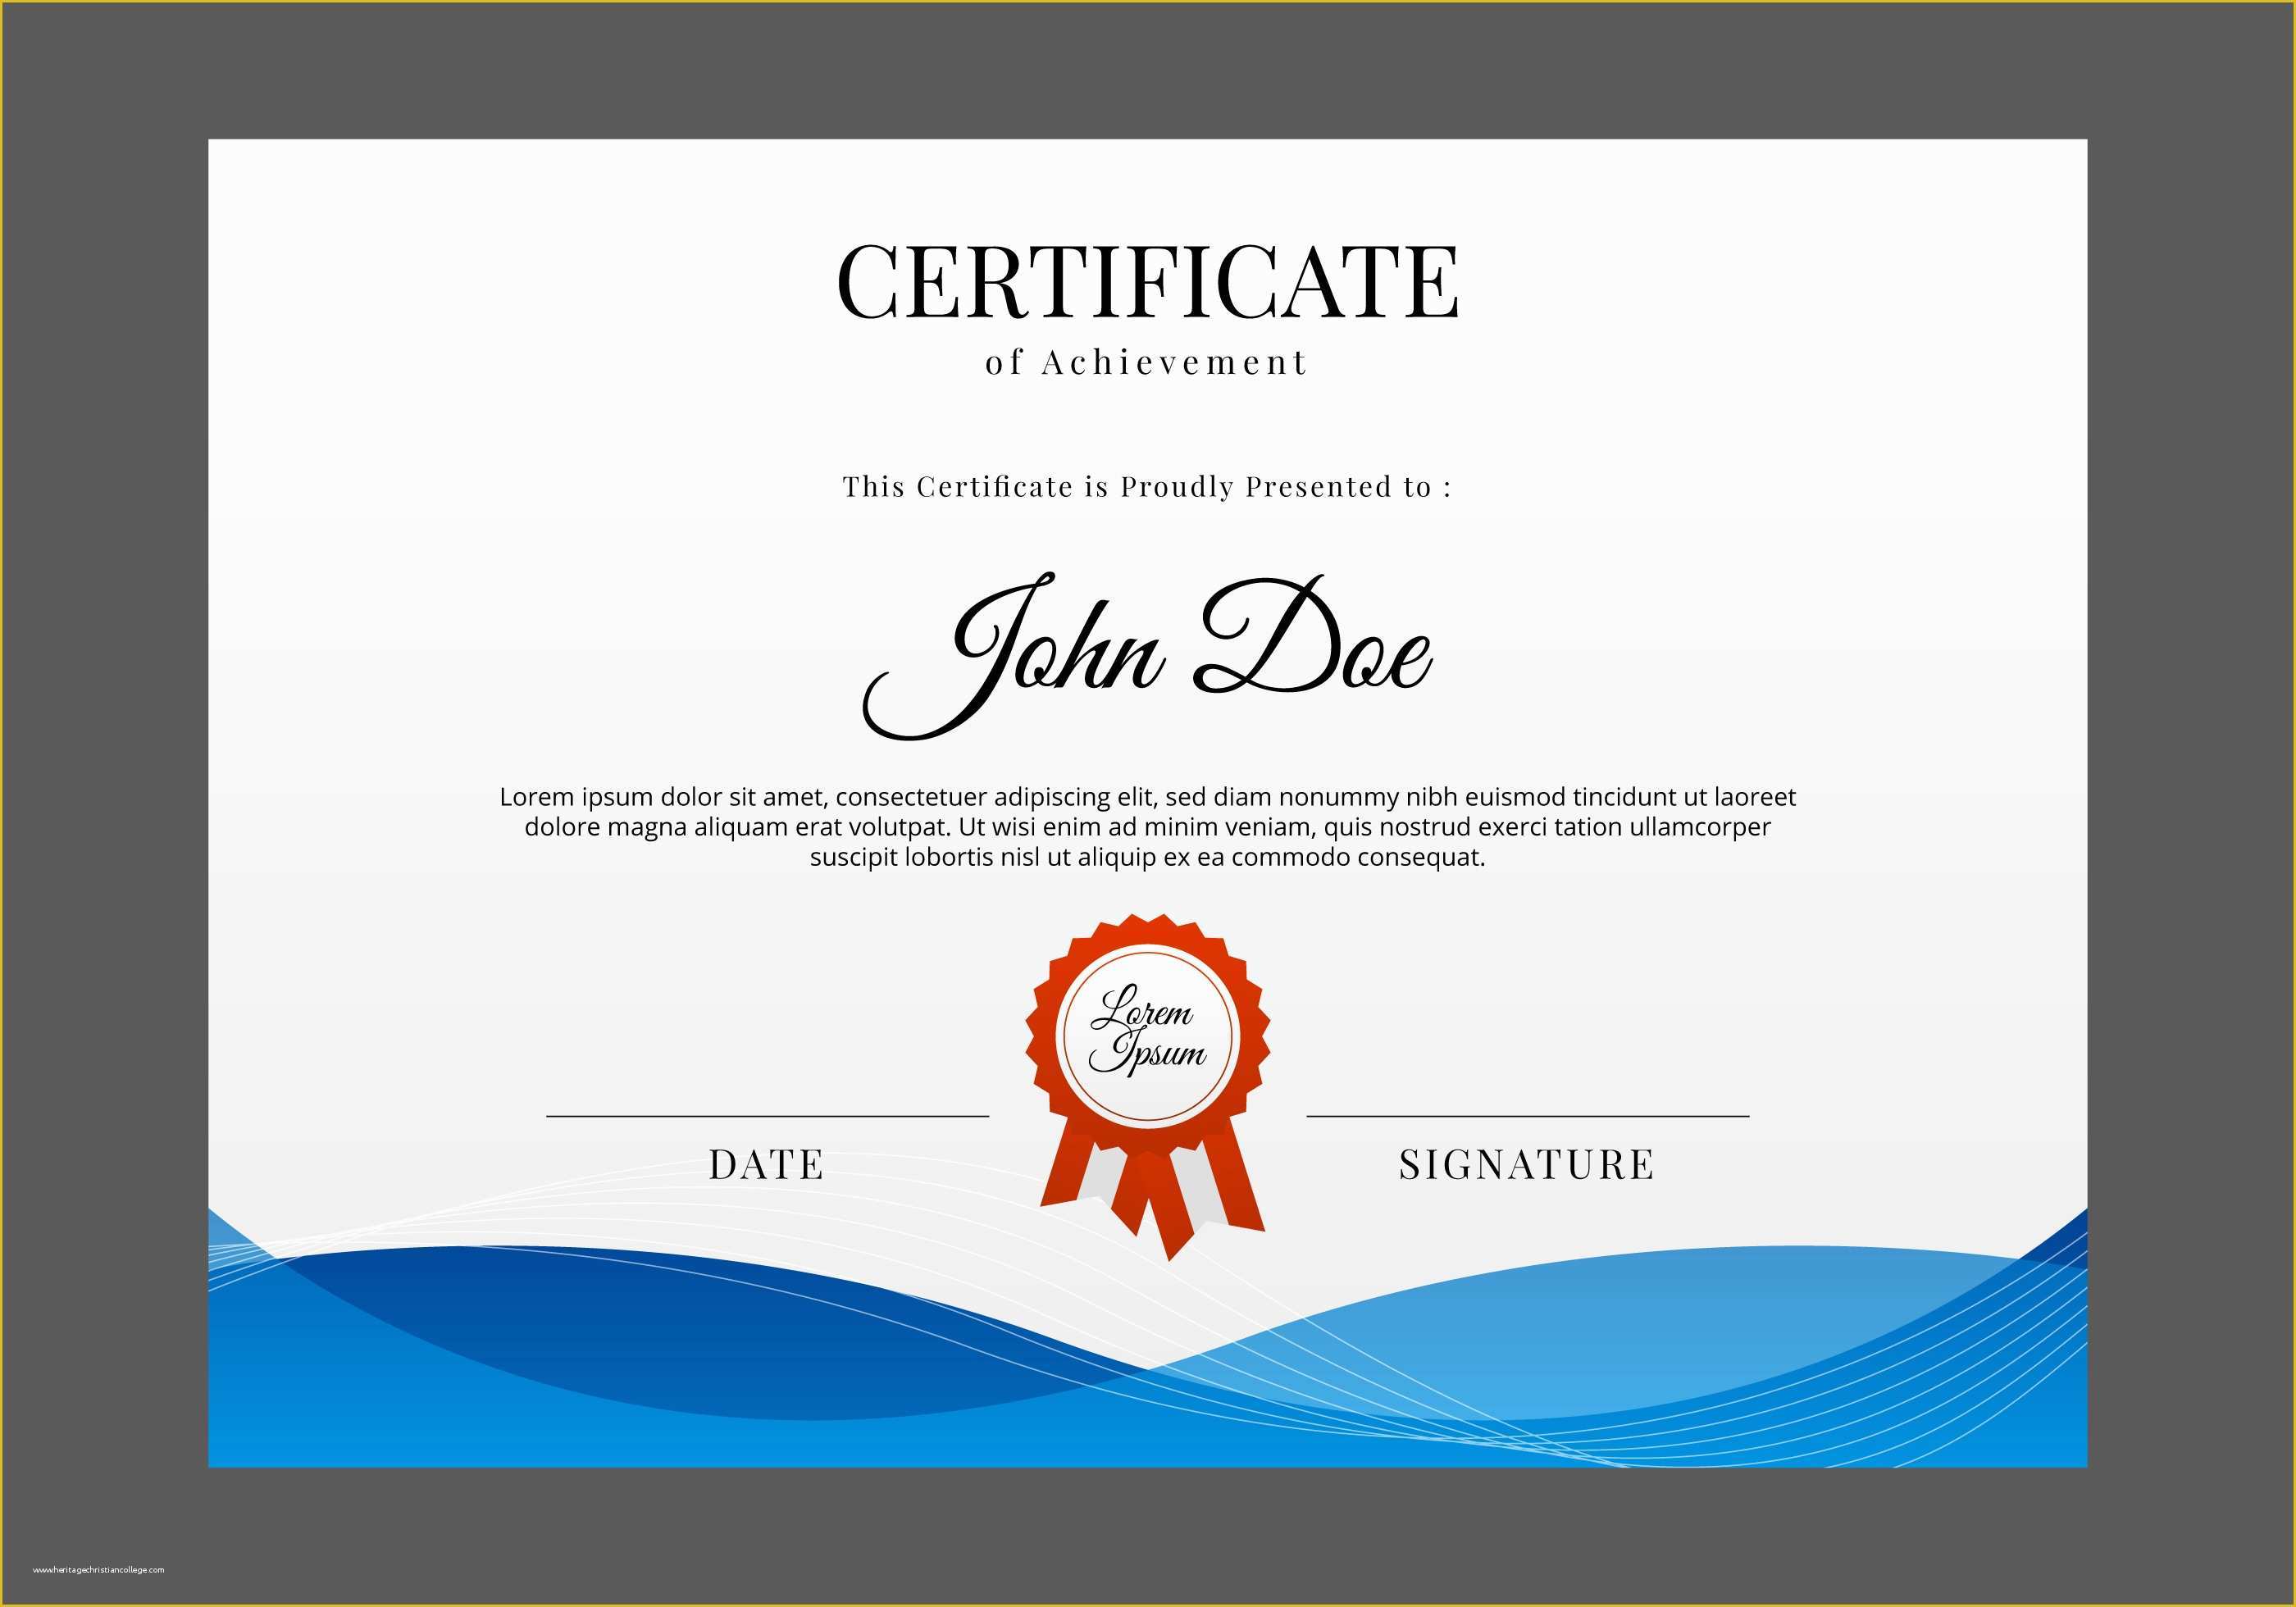 Free Online Diploma Templates Of Certificate Template Free Vector Art Free Downloads